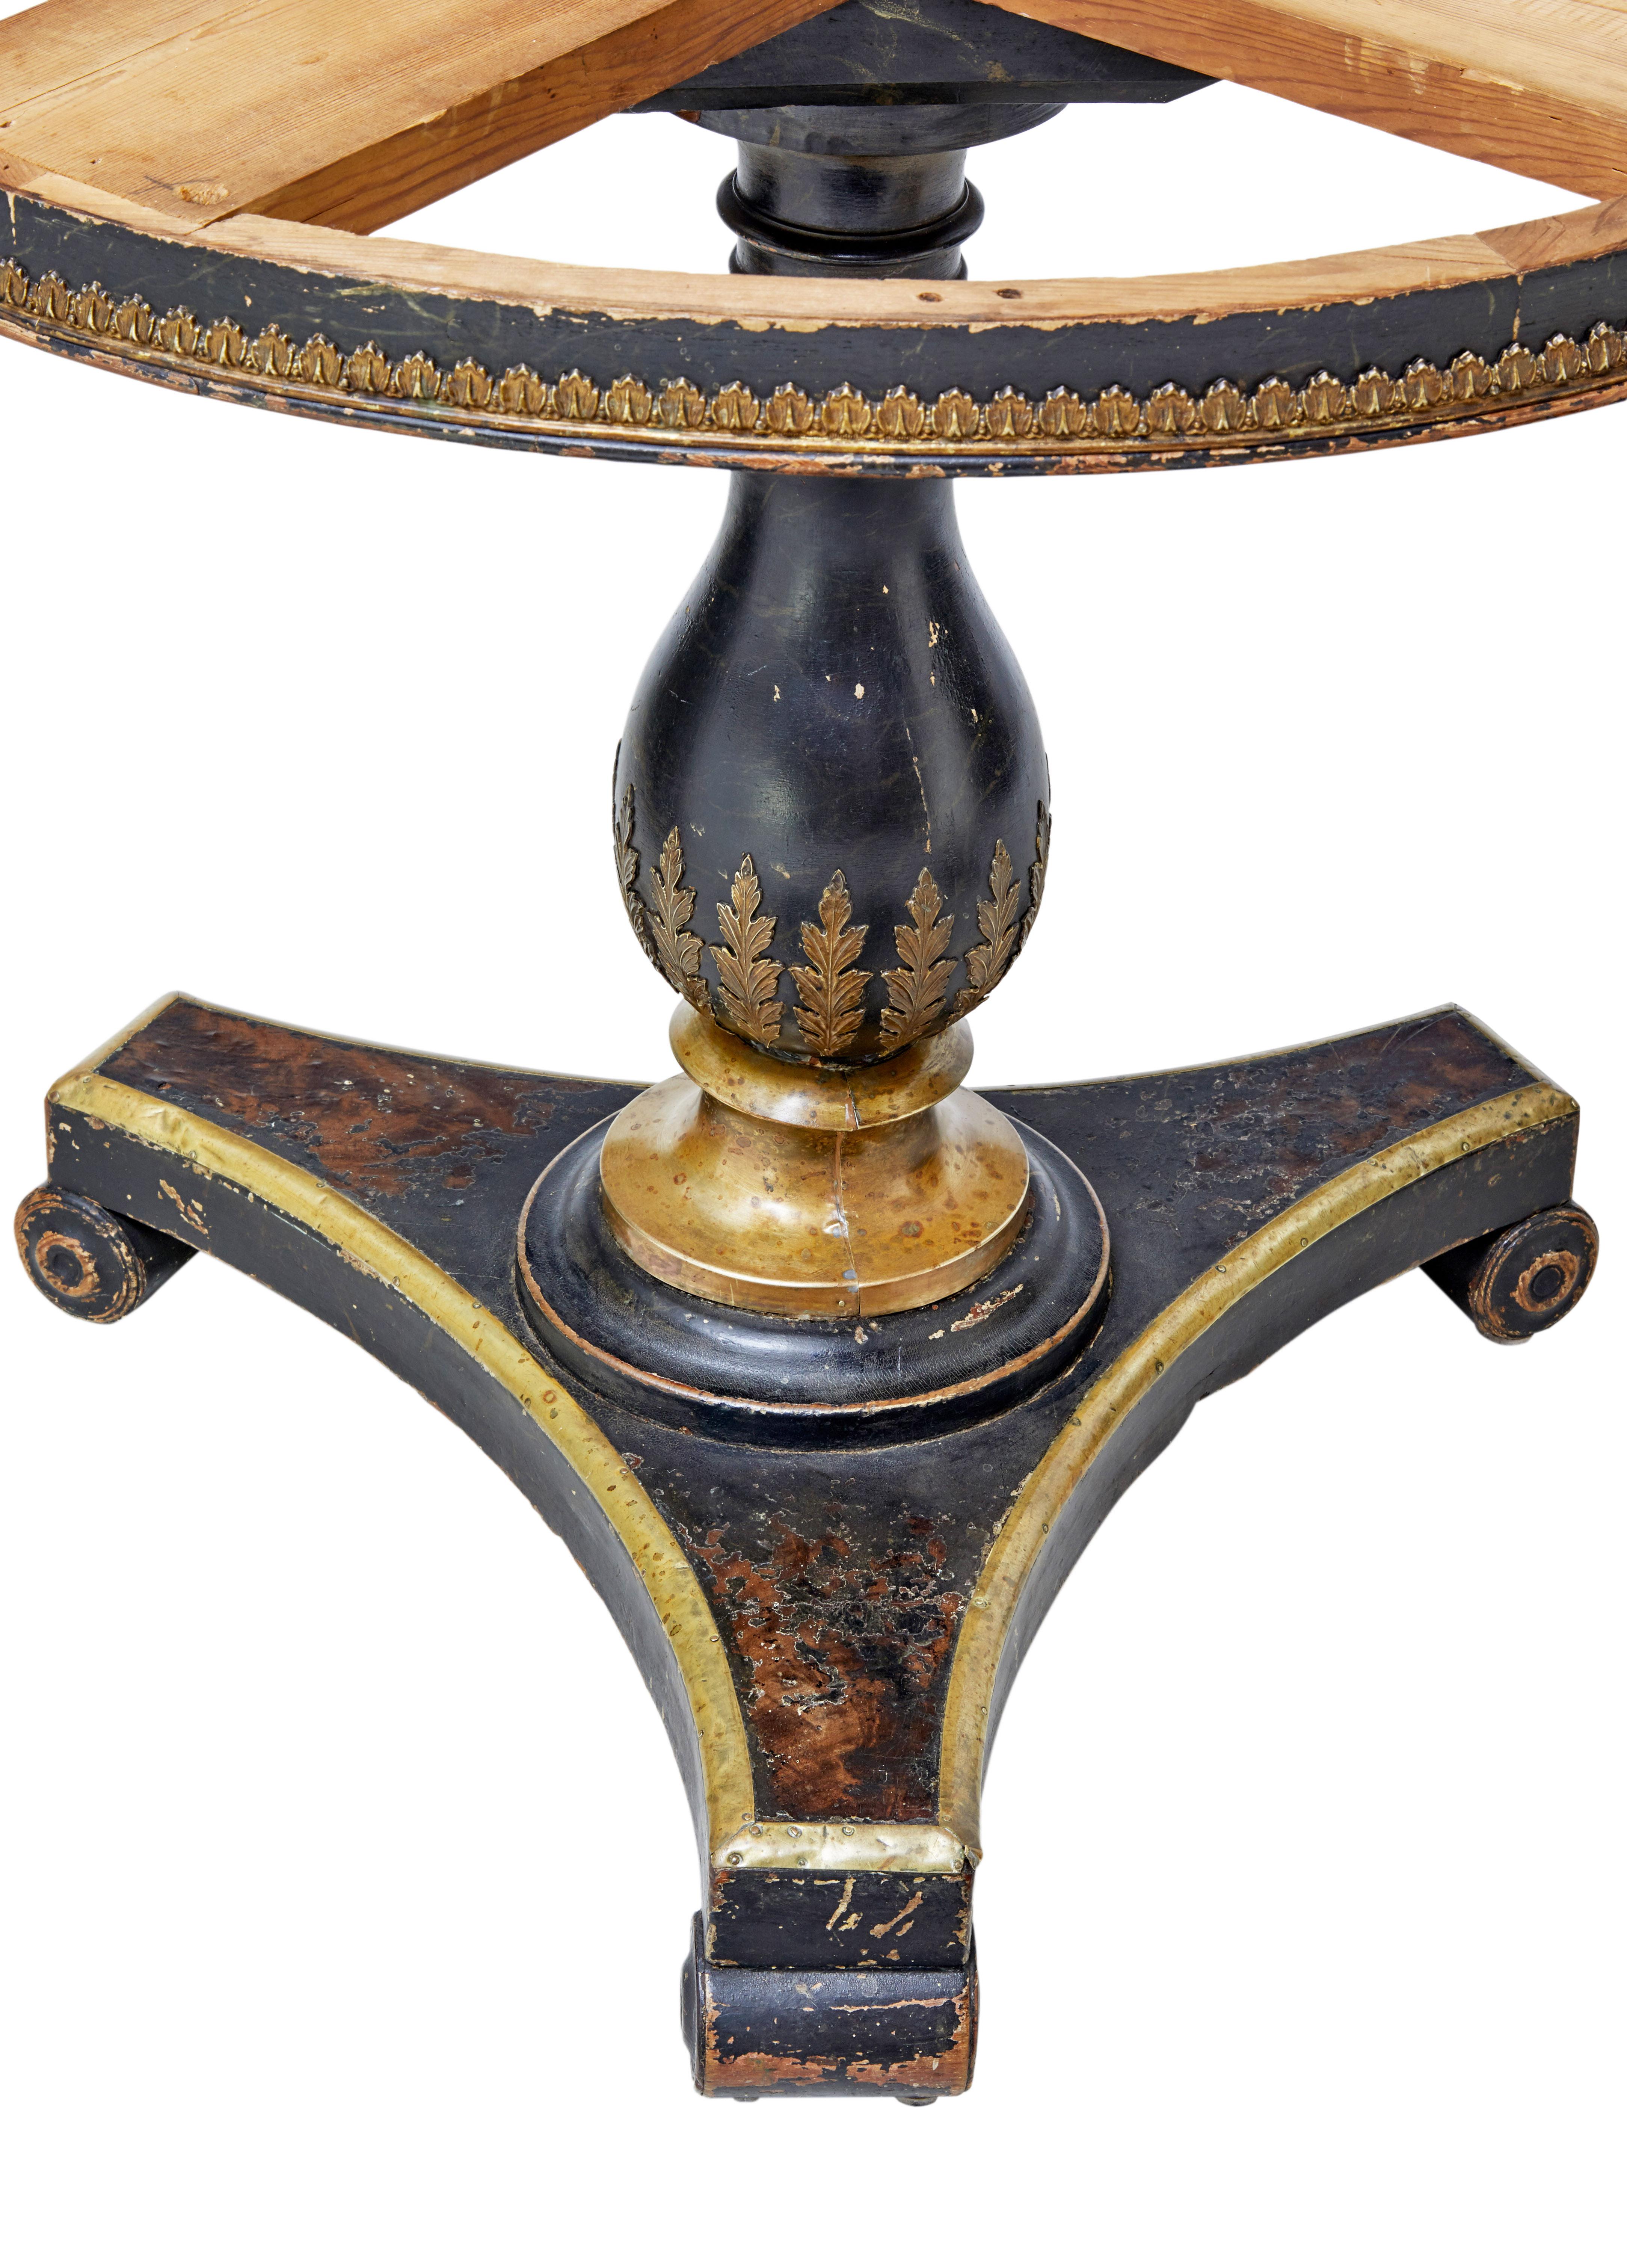 Rare marble top center table circa 1820.

A mahogany center table very much in the taste of brighton pavillion. With later 19th century ebonized brass decoration to the stem and base. Standing on scrolled feet.

Original bull nose marble top